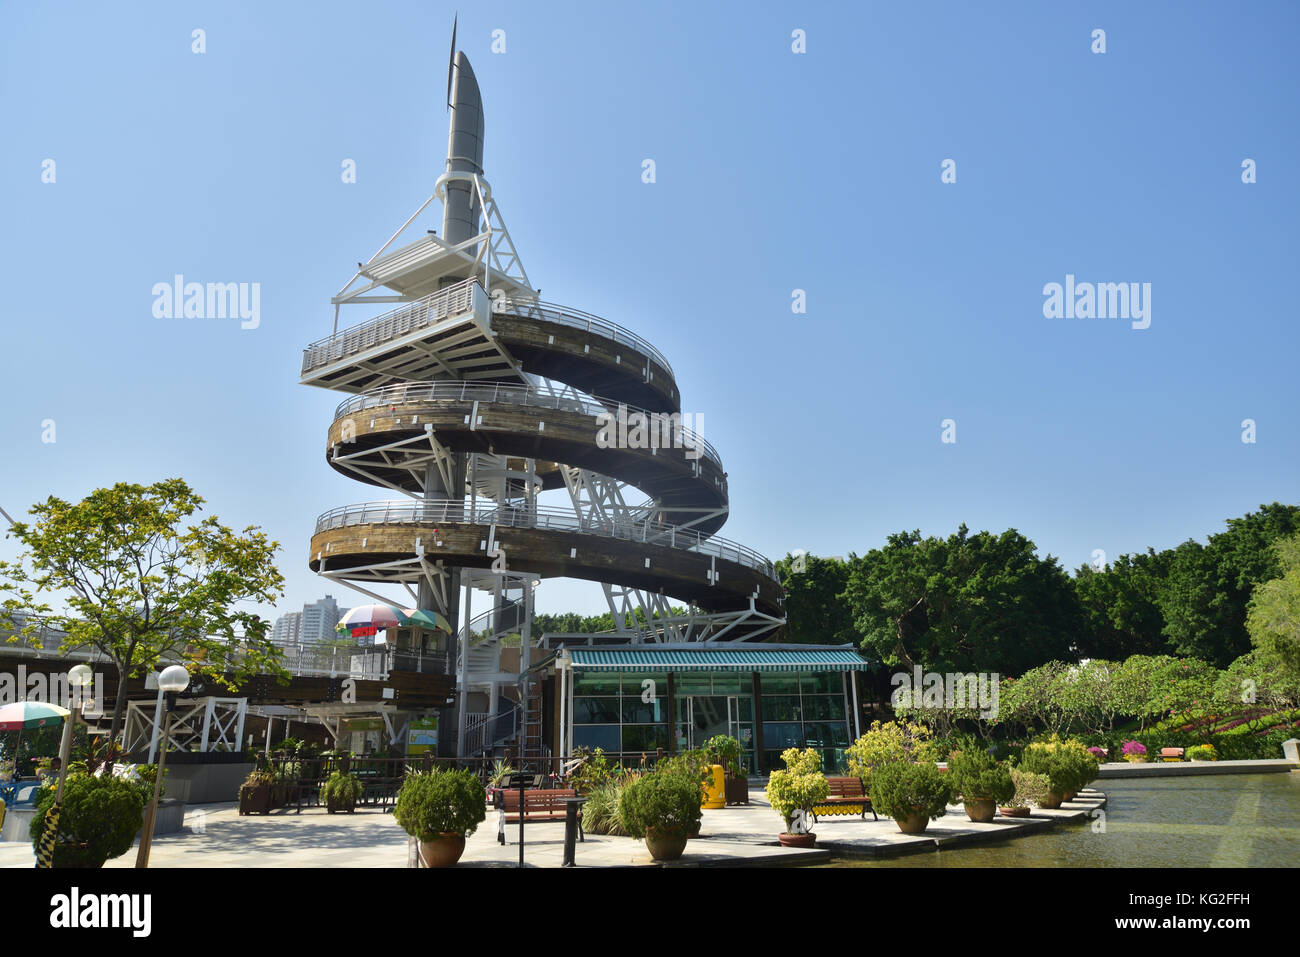 Spiral Lookout Tower in Tai Po Waterfront Park, Hong Kong. It was built to commemorate the handover of the sovereignty of Hong Kong to China. Stock Photo